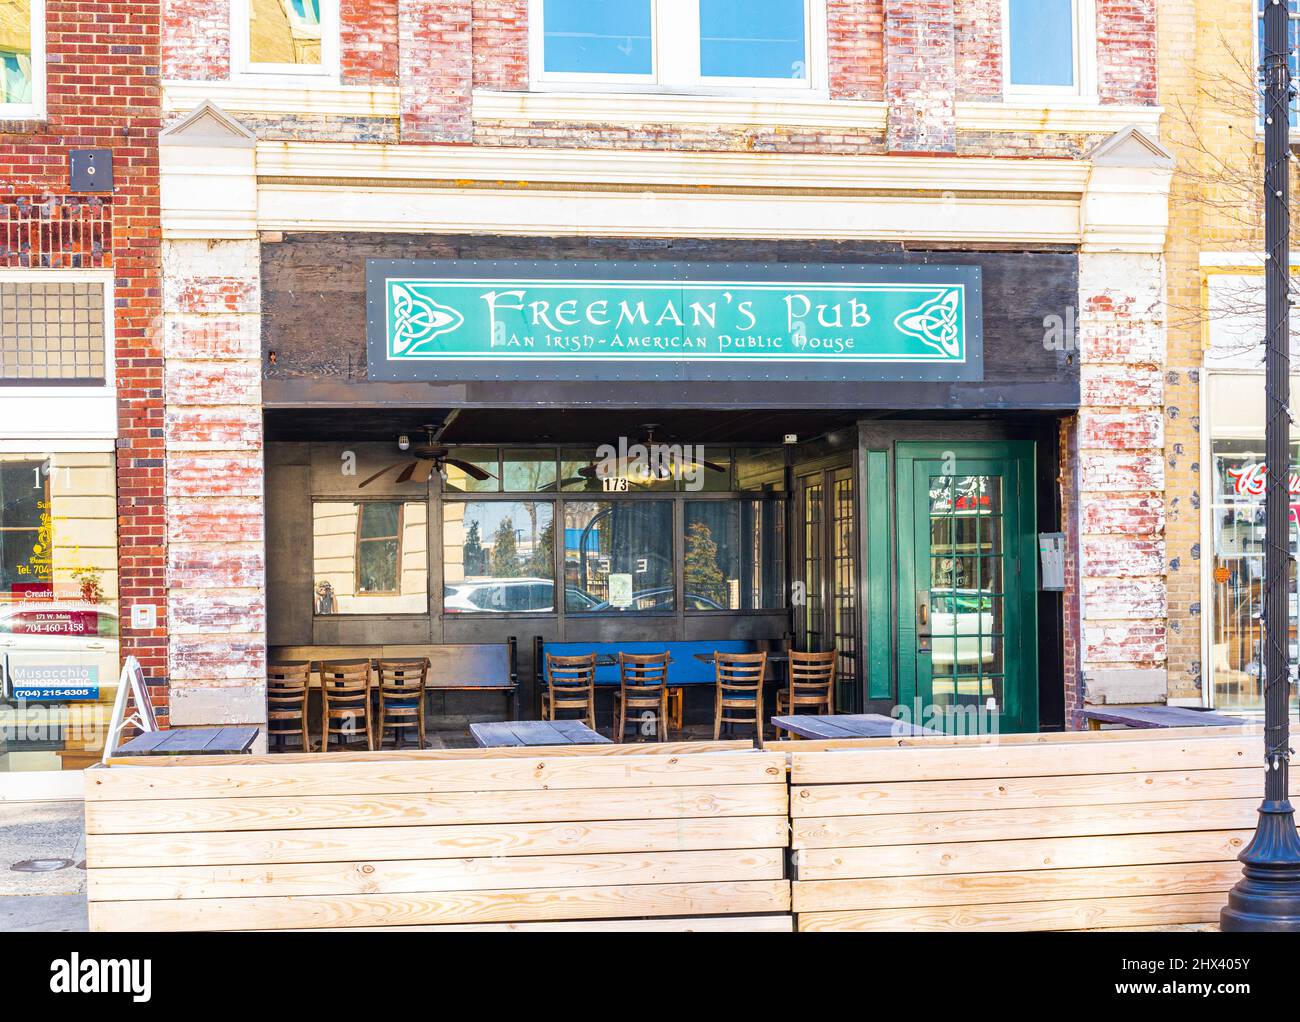 GASTONIA, NC, USA-3 MARCH 2022: Freeman's Pub, an Irish-American Public House, showing facade, entrance with covered outdoor seating, and grow boxes a Stock Photo